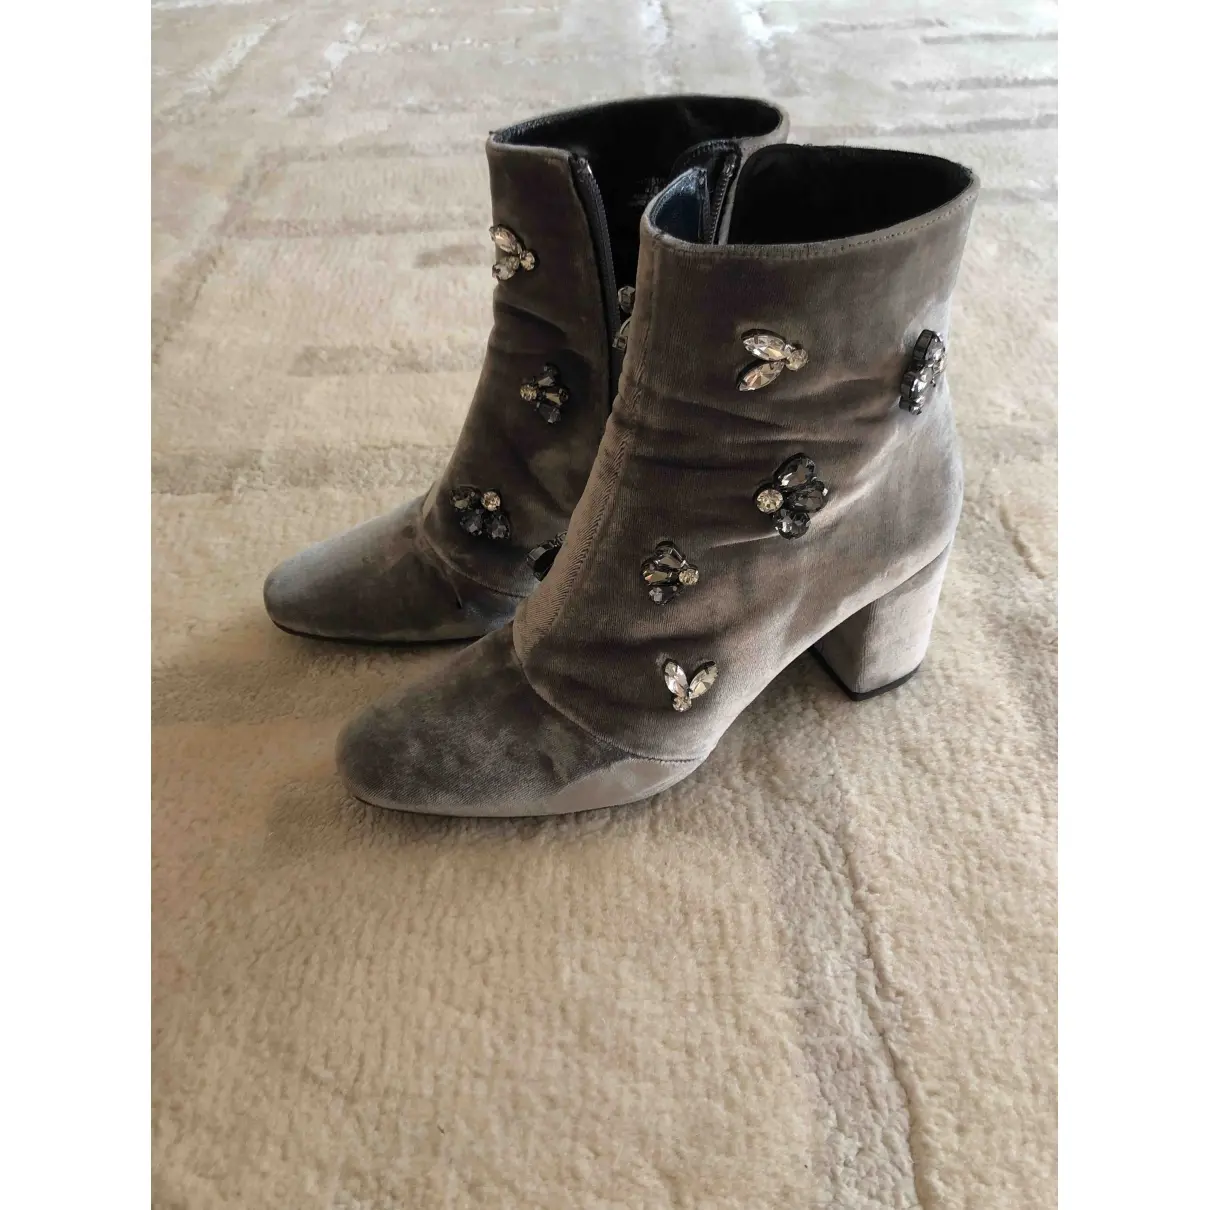 Uterque Velvet ankle boots for sale